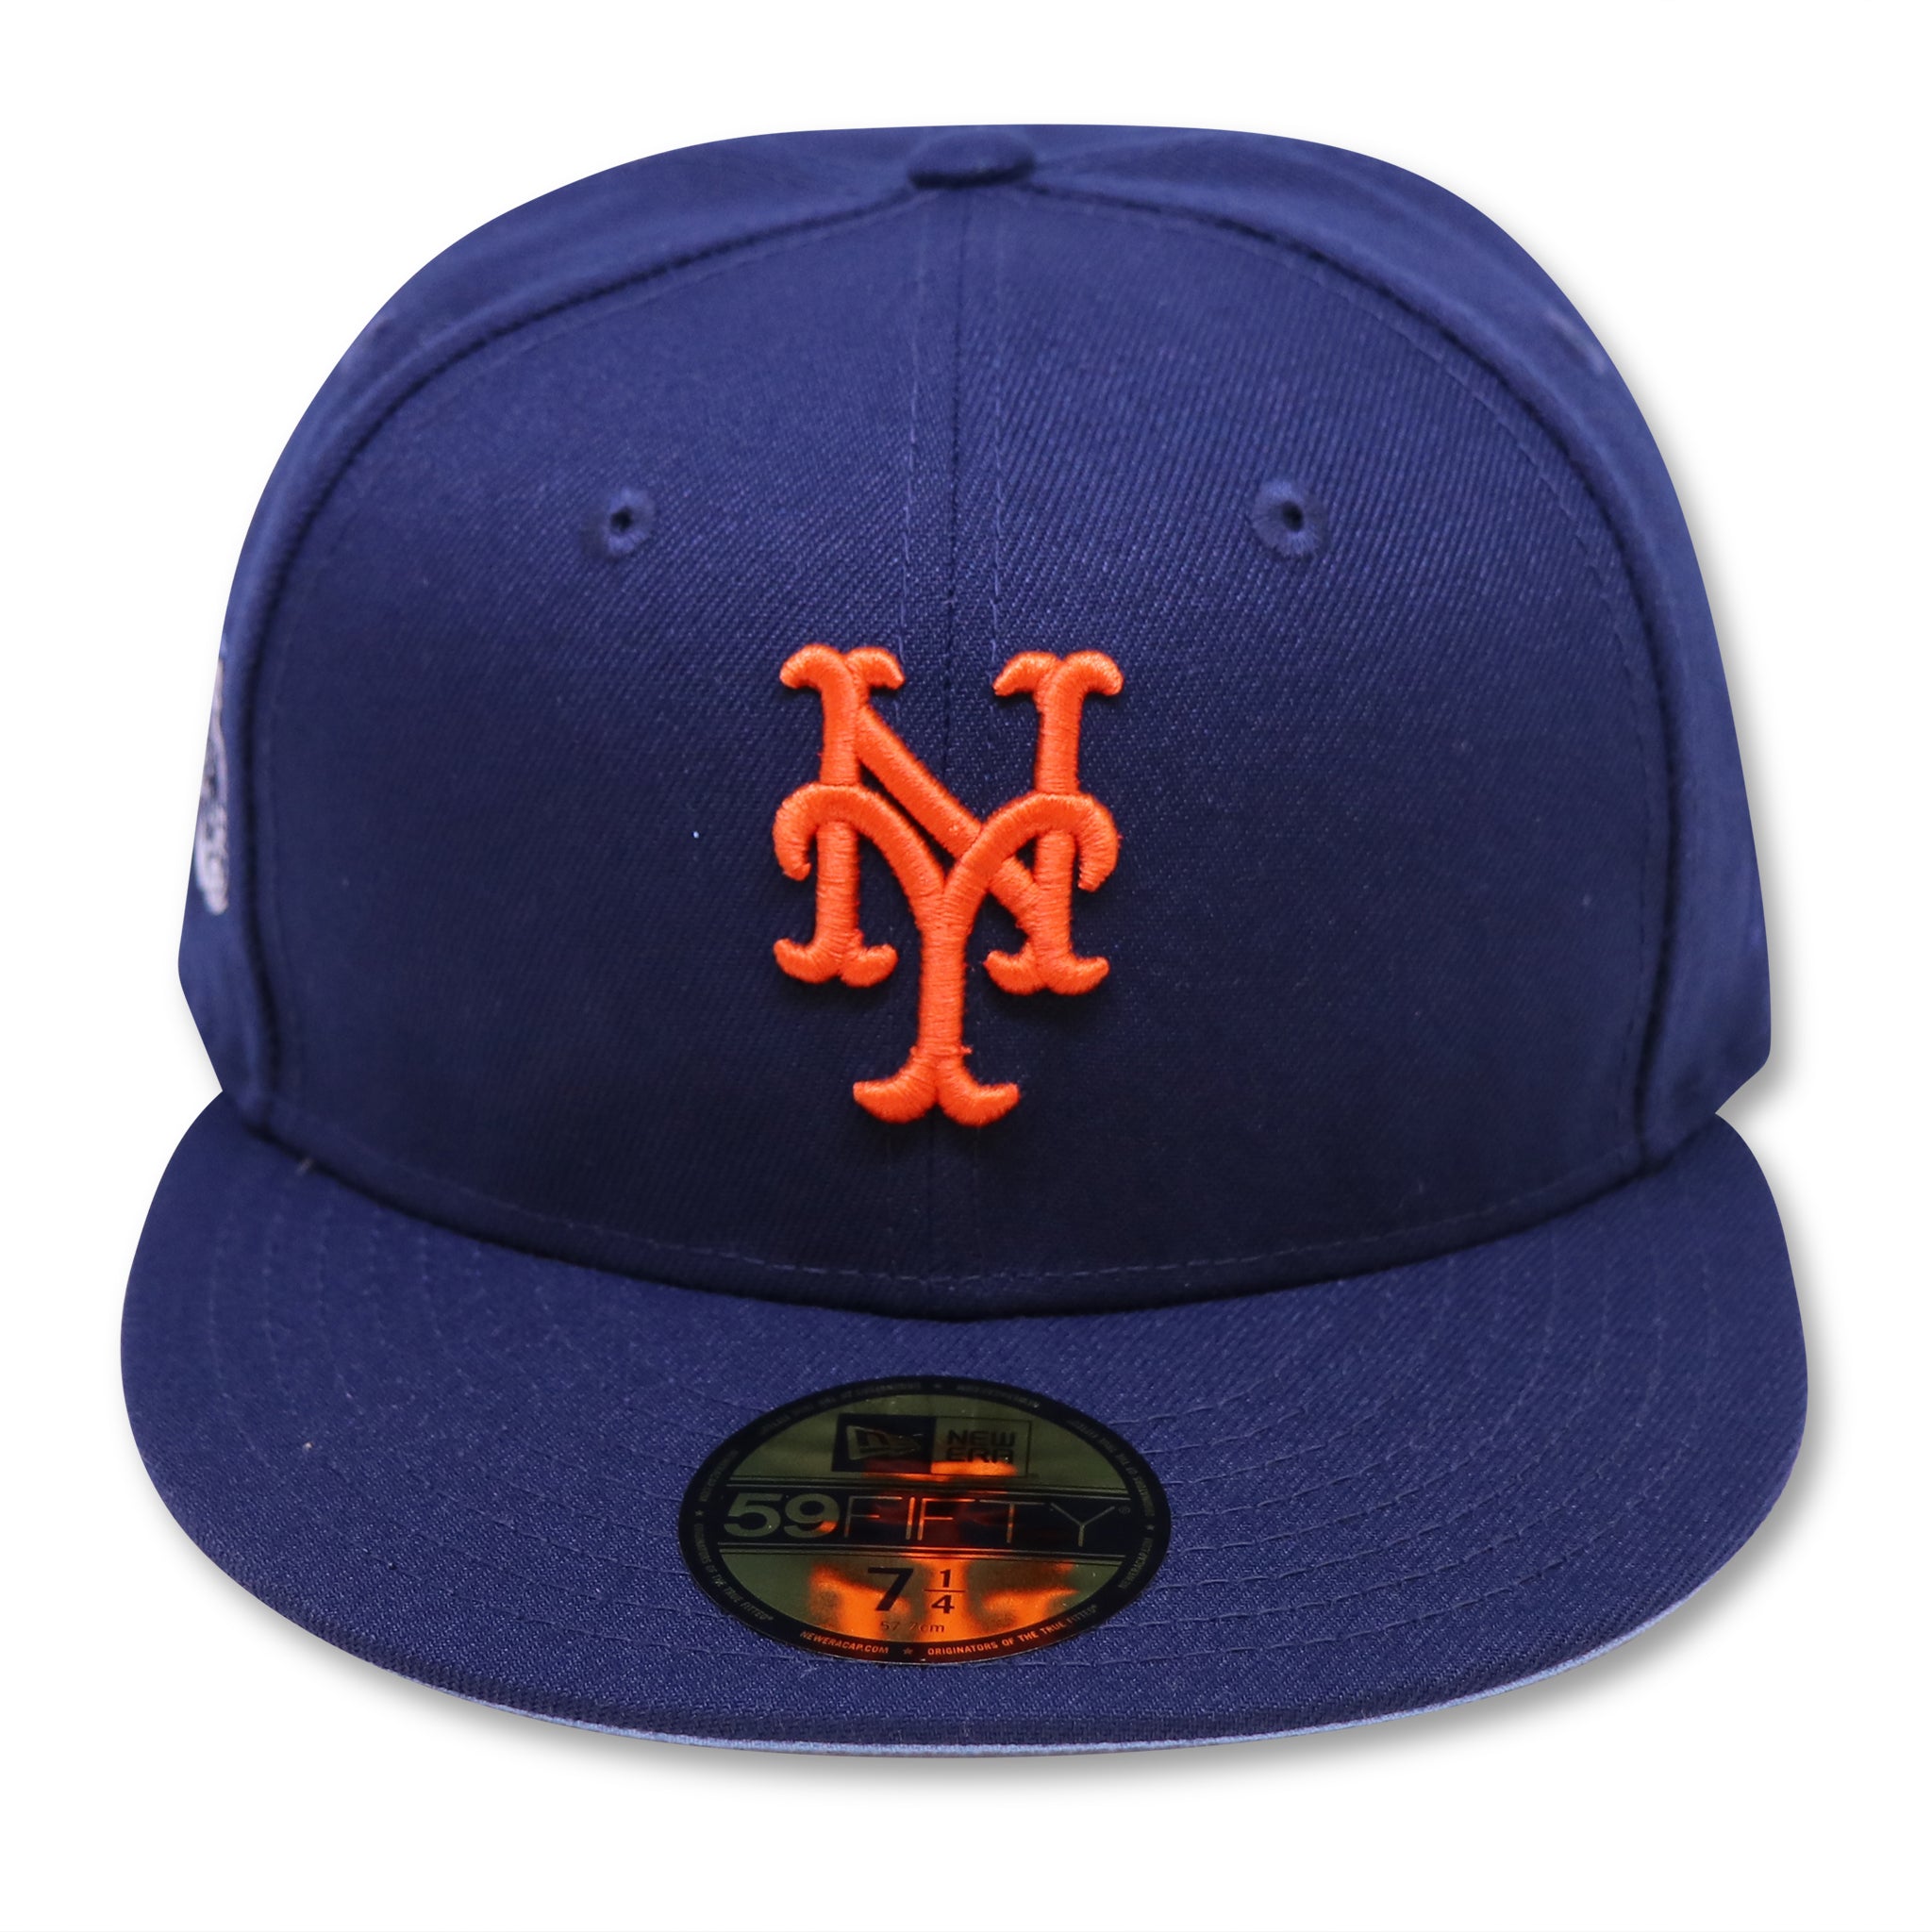 NEW YORK METS (NAVY) (2008 ASG) "REVERSE RIVALRY" NEW ERA 59FIFTY FITTED (SKYBLUE BOTTOM)